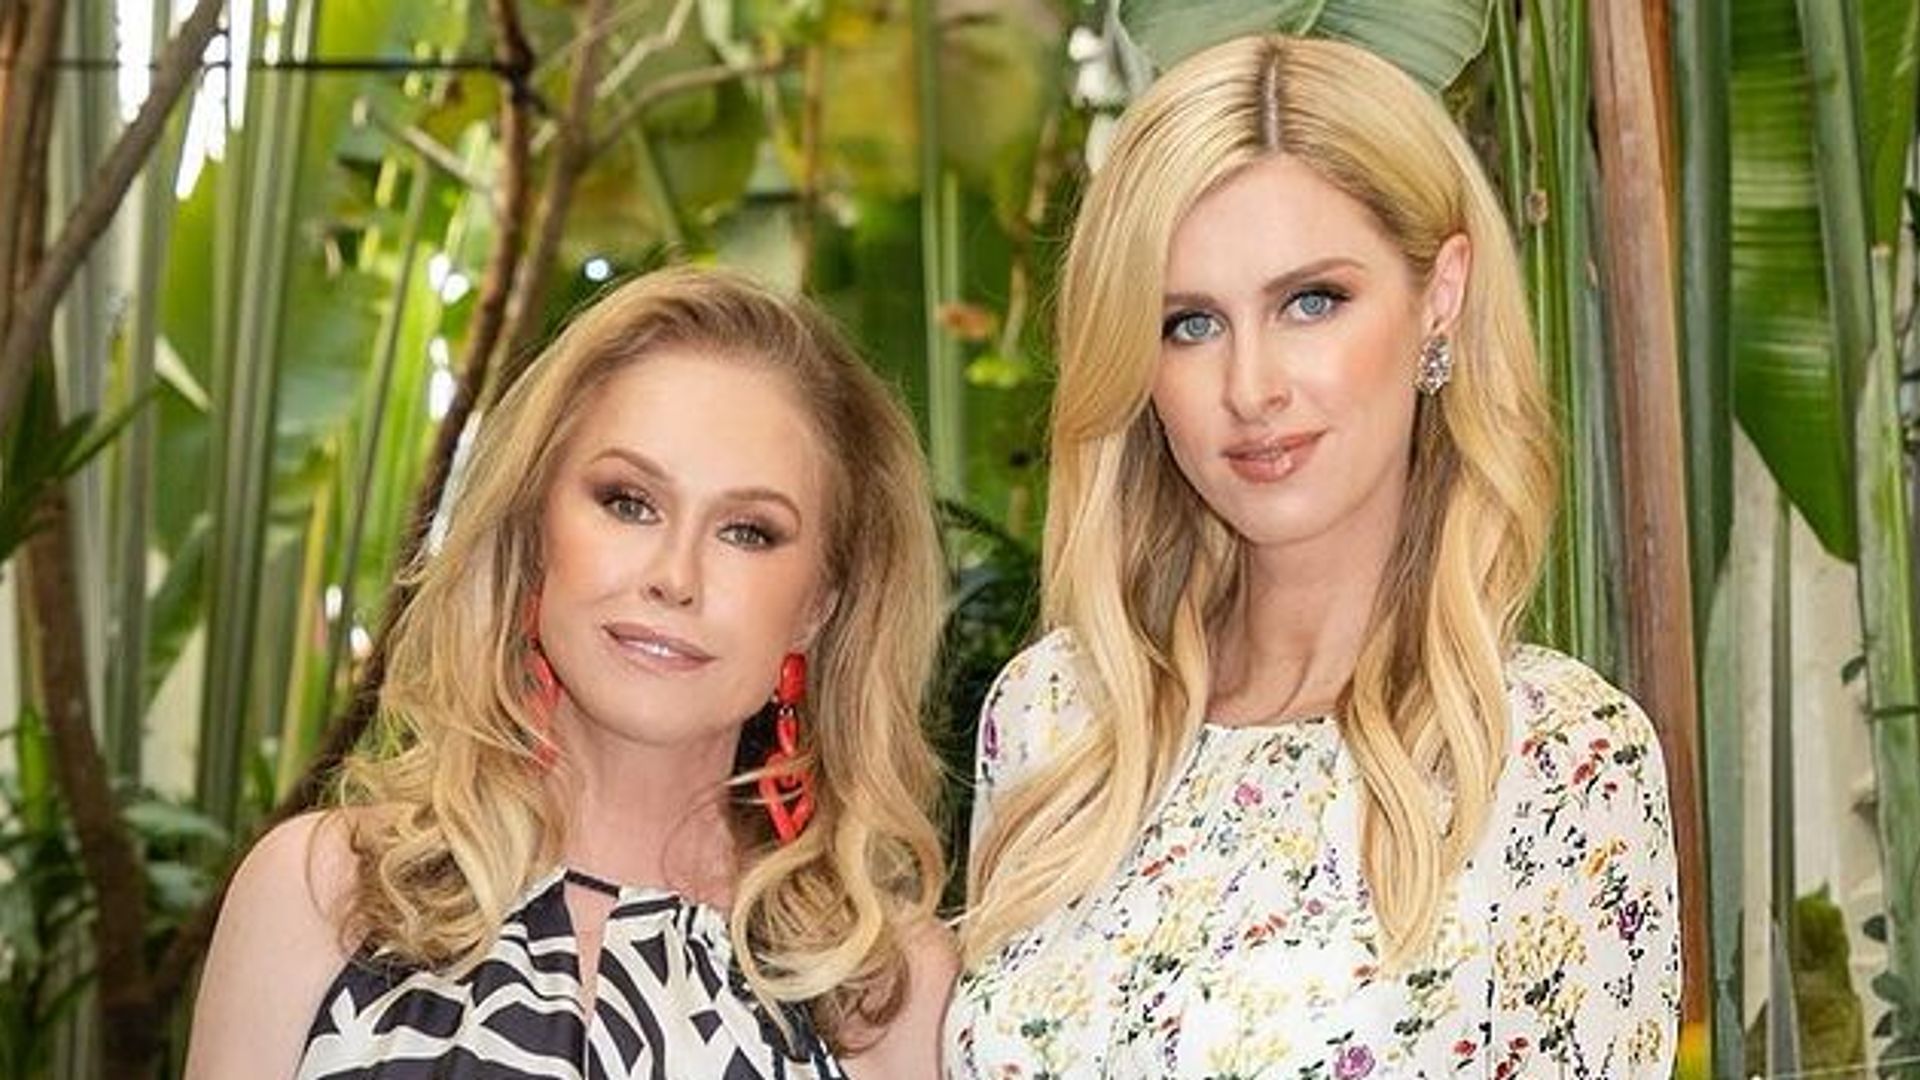 Nicky and Kathy Hilton on their close family bond and shared beauty secrets